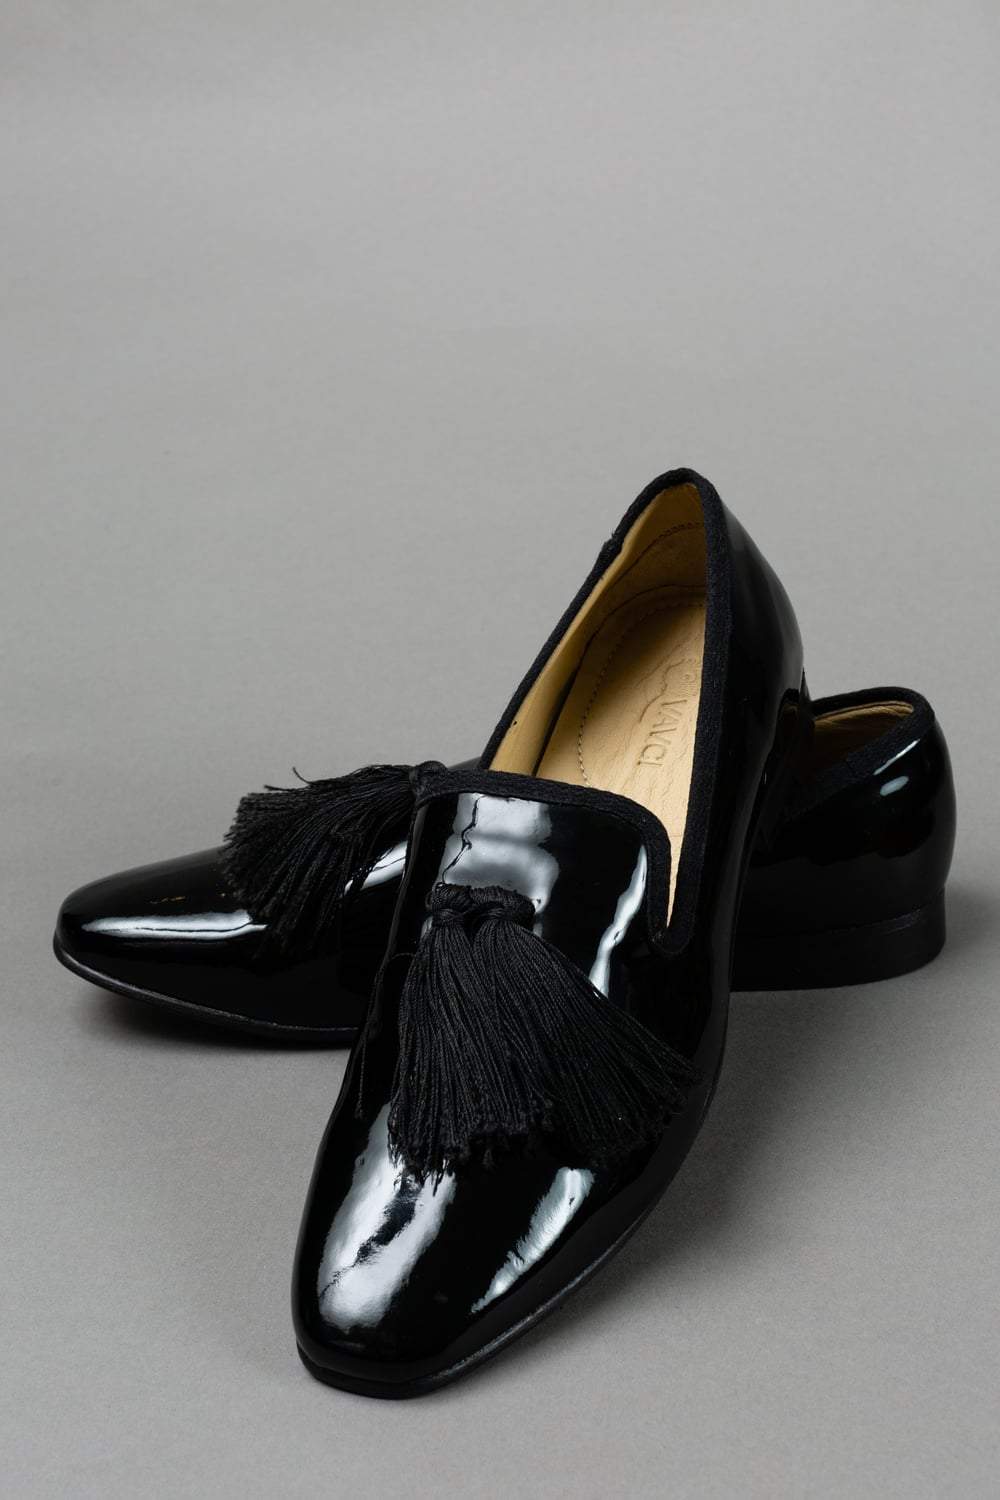 Black Patent Leather Slip-On Shoes